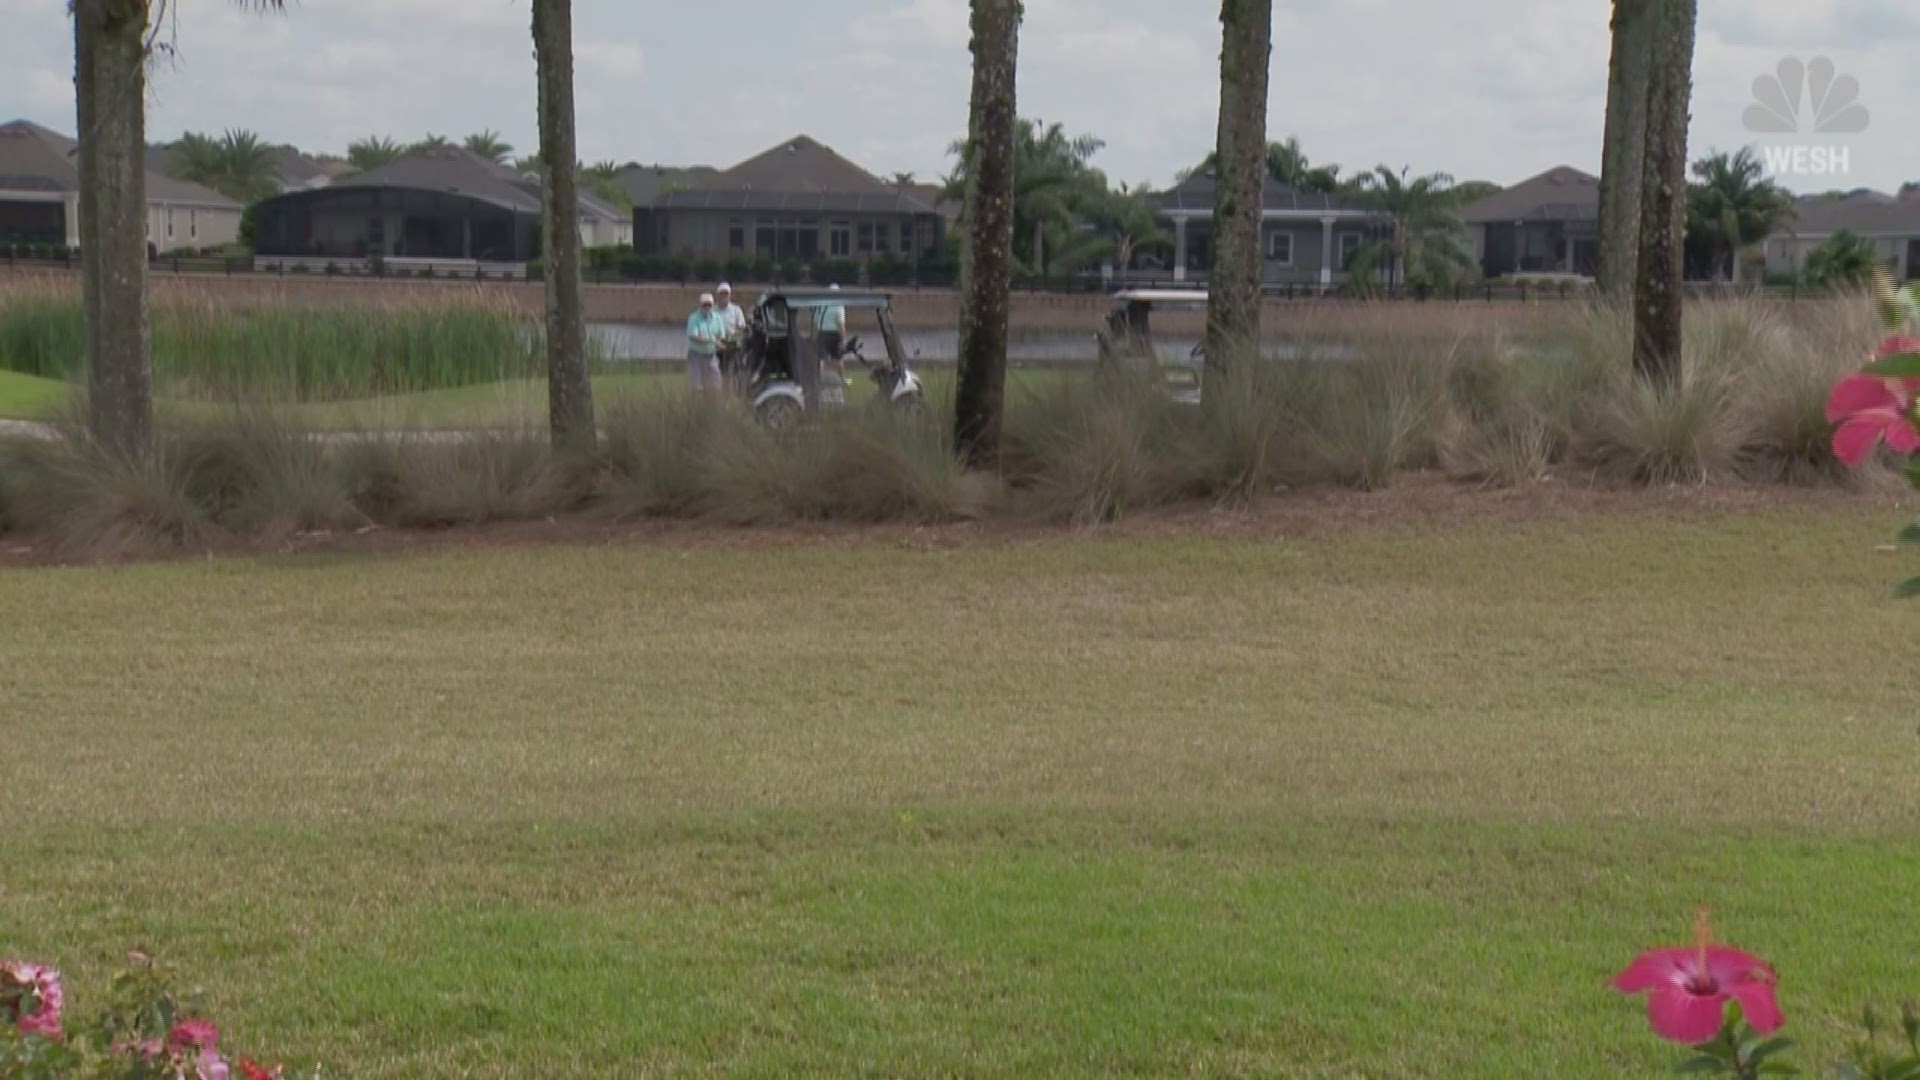 Huge celebrity alligator "Larry" draws a crowd at Florida golf course. WESH's Michelle Meredith reports.